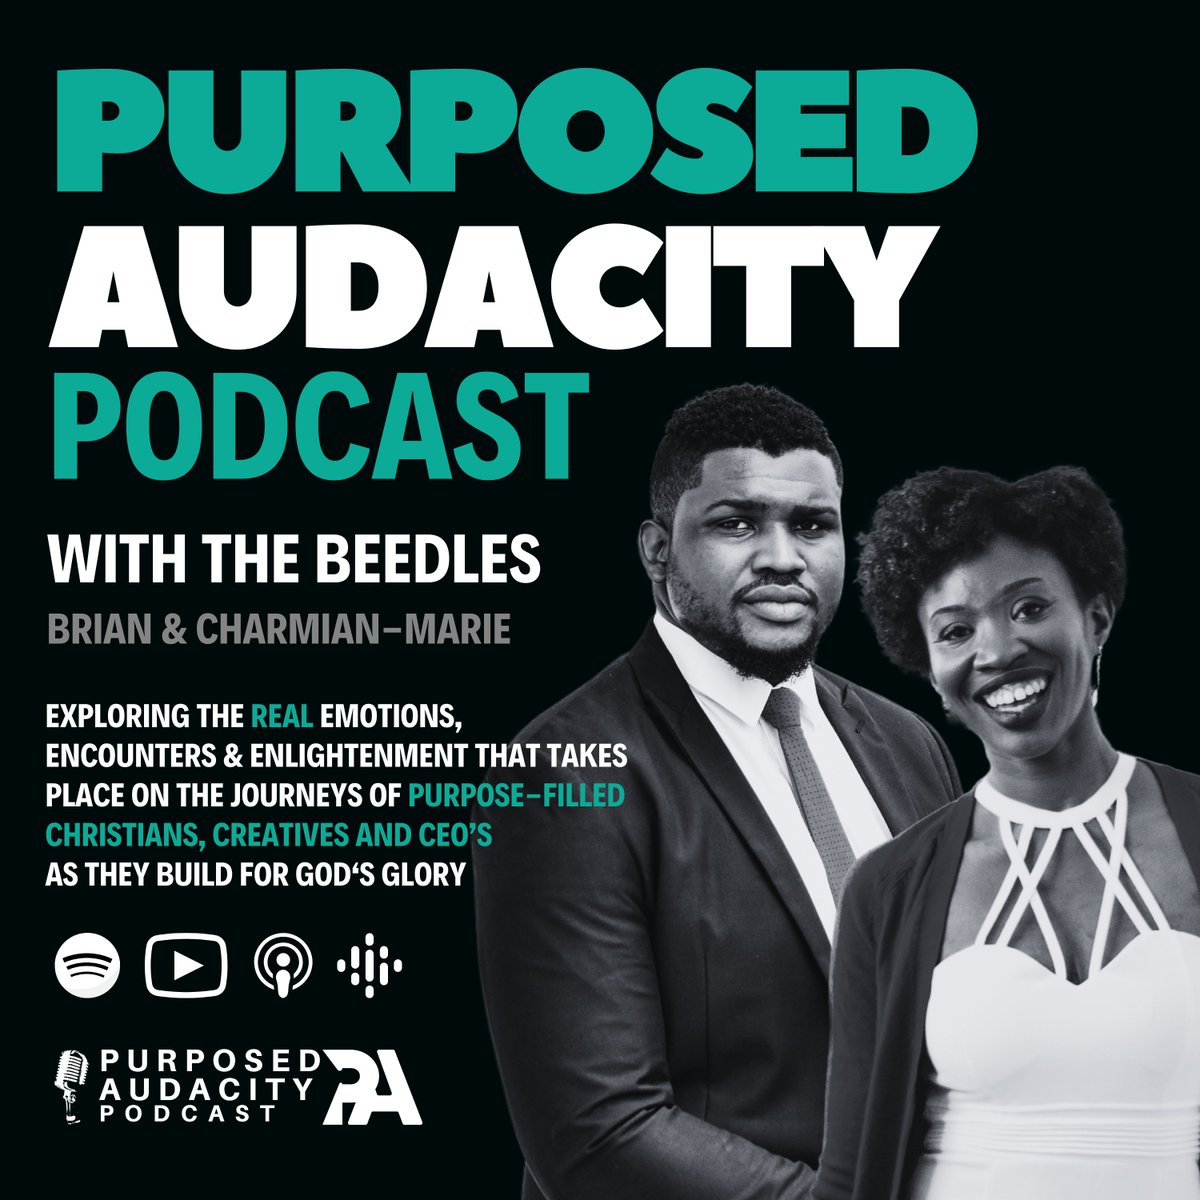 The latest episode is LIVE! Be sure to check it out!

#purposedaudacitypodcast #christianpodcast #purposepursuit #walkwithgod #christianlife